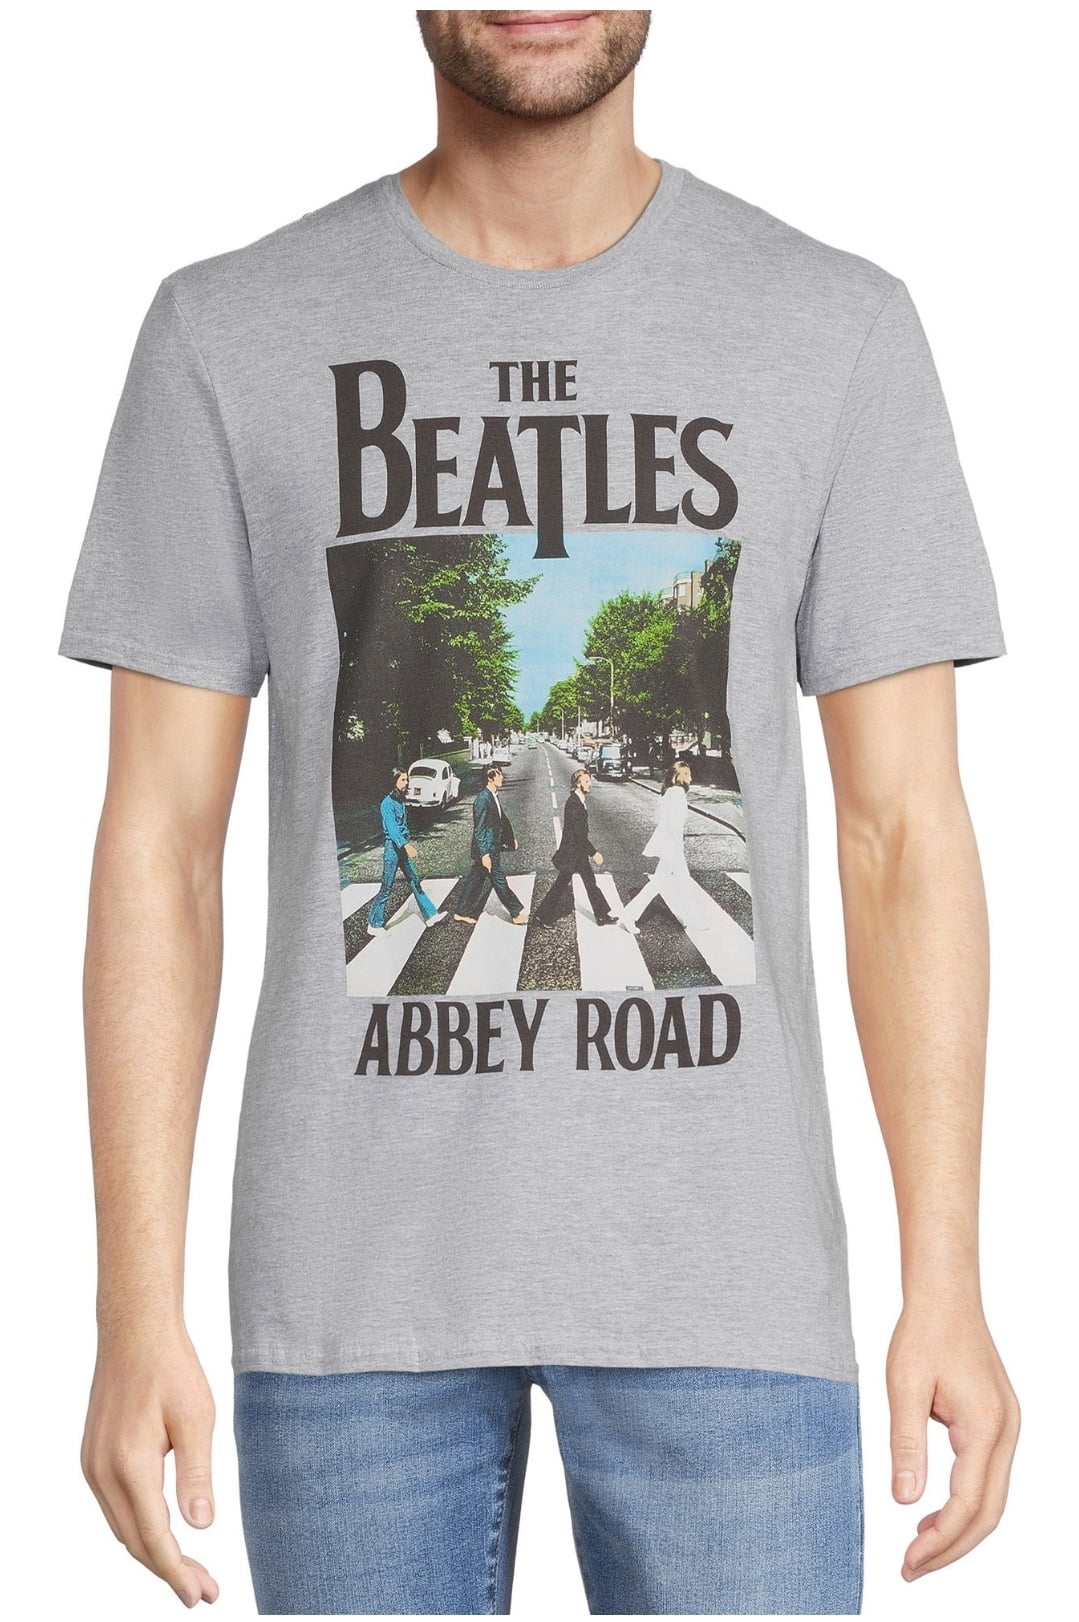 The Beatles Abbey Road Gray Graphic T-Shirt - 2XL